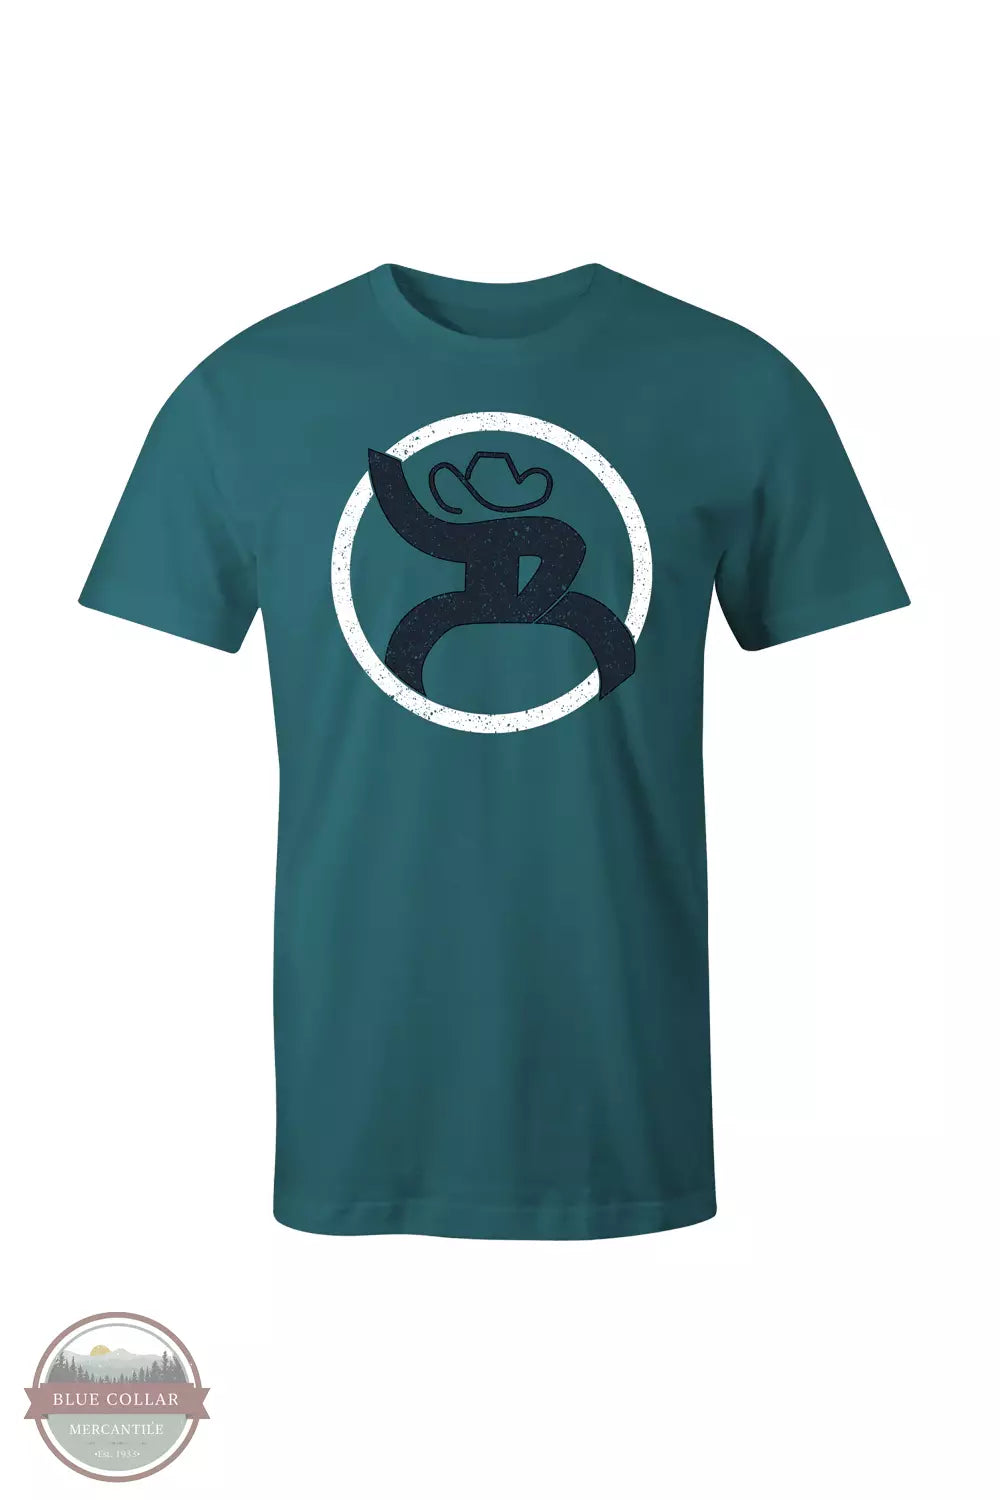 Hooey RT1516TL Strap Short Sleeve Graphic T-Shirt in Teal Heather Front View